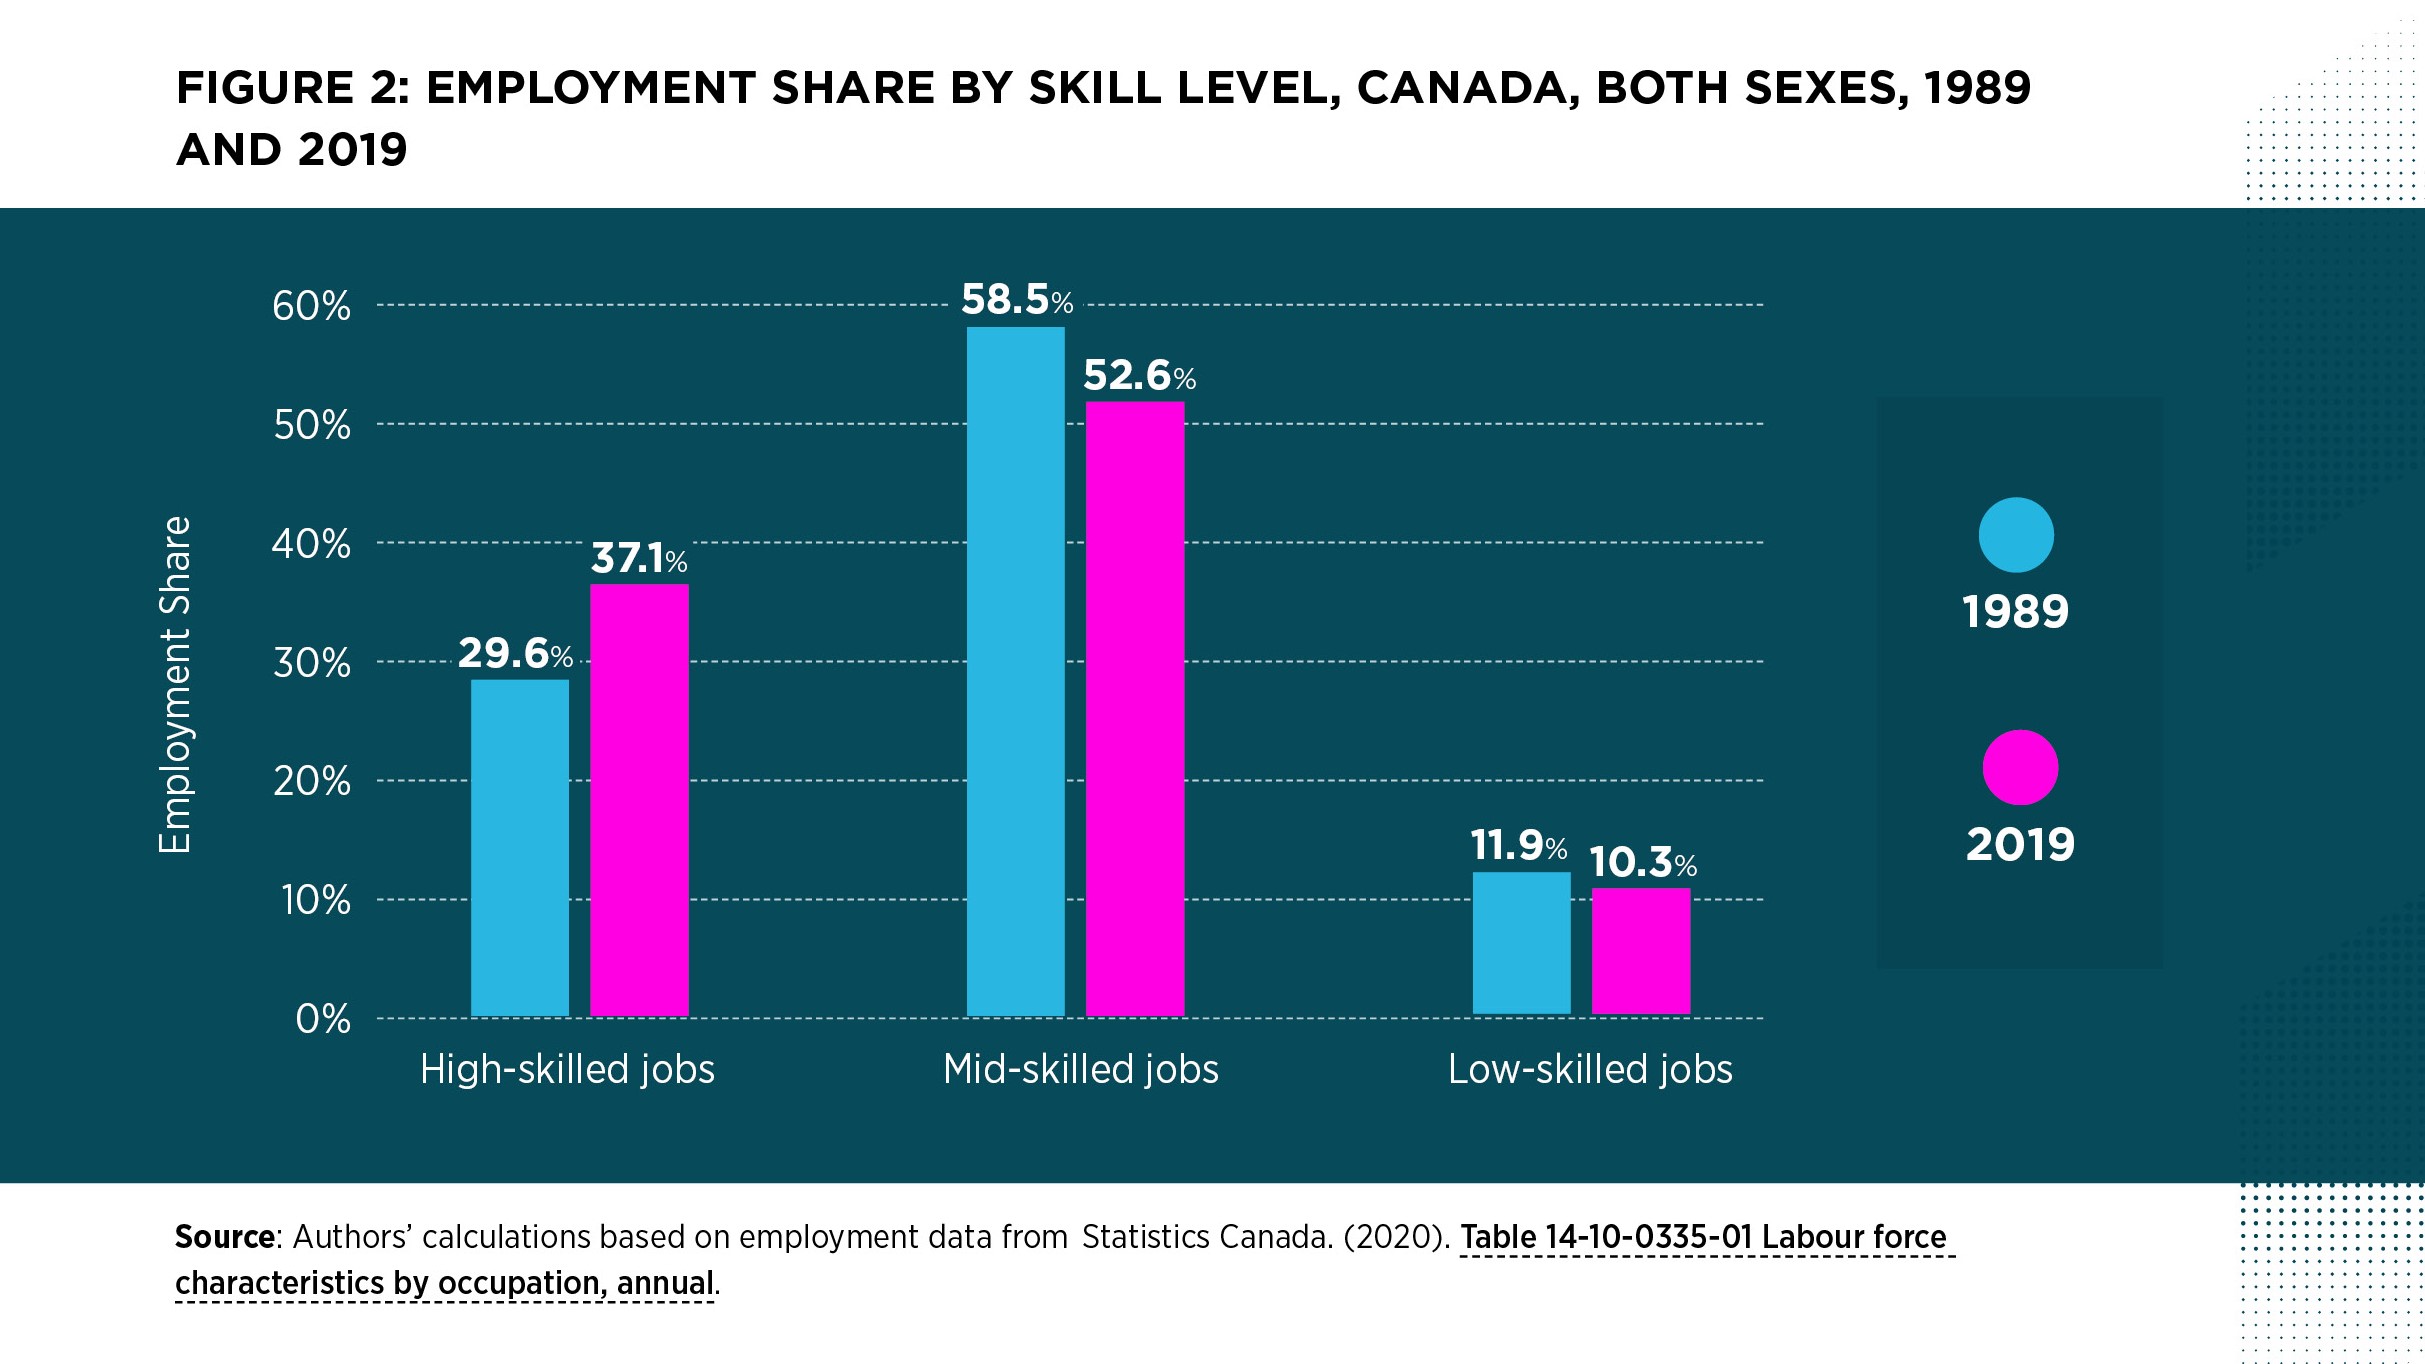 FIGURE 2: EMPLOYMENT SHARE BY SKILL LEVEL, CANADA, BOTH SEXES, 1989
AND 2019